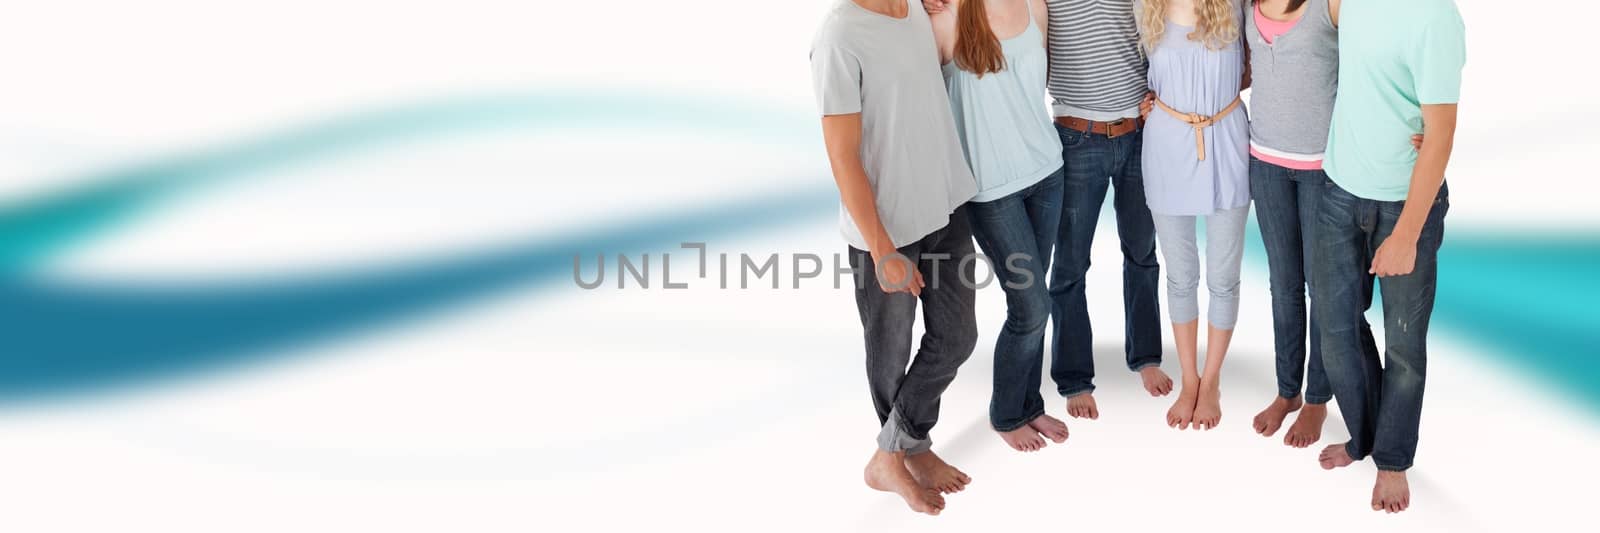 Digital composite of Group of People standing with curved background